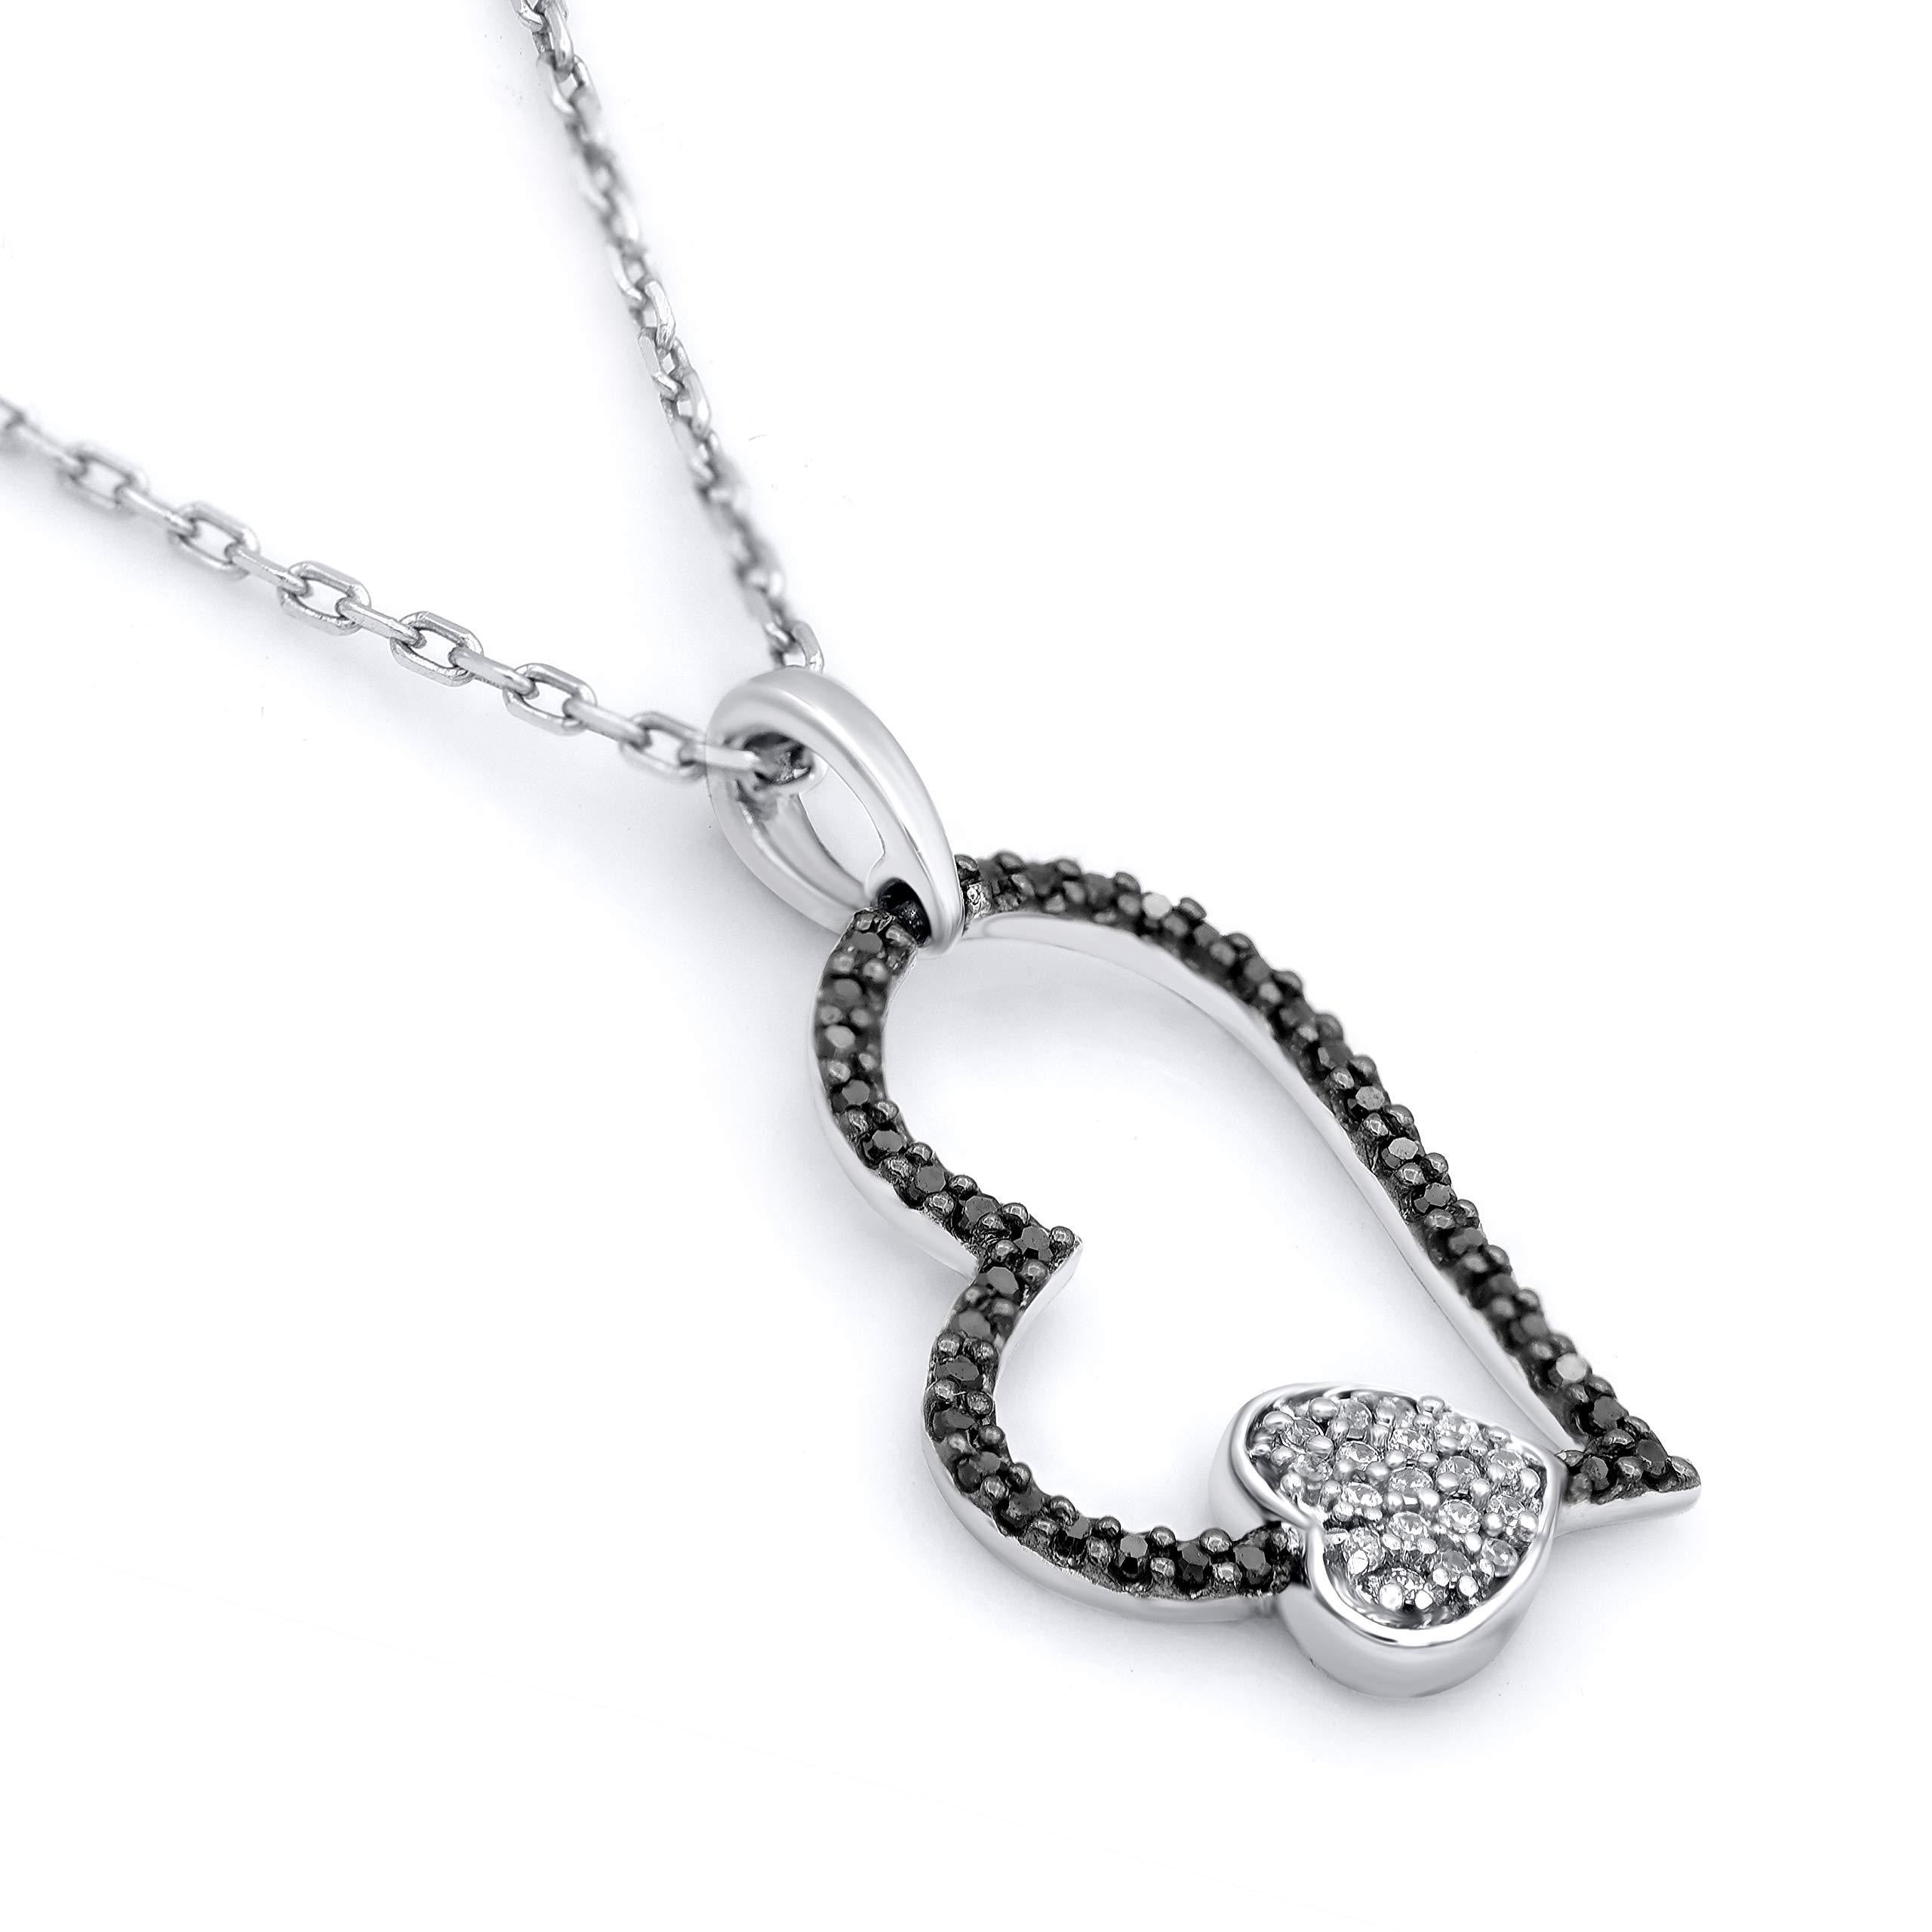 A striking addition when worn on its own, this diamond pendant makes a stunning impression. This heart pendant is crafted from 14-karat white gold and features 54 single cut & black treated diamonds set in prong and pave setting. H-I color I2